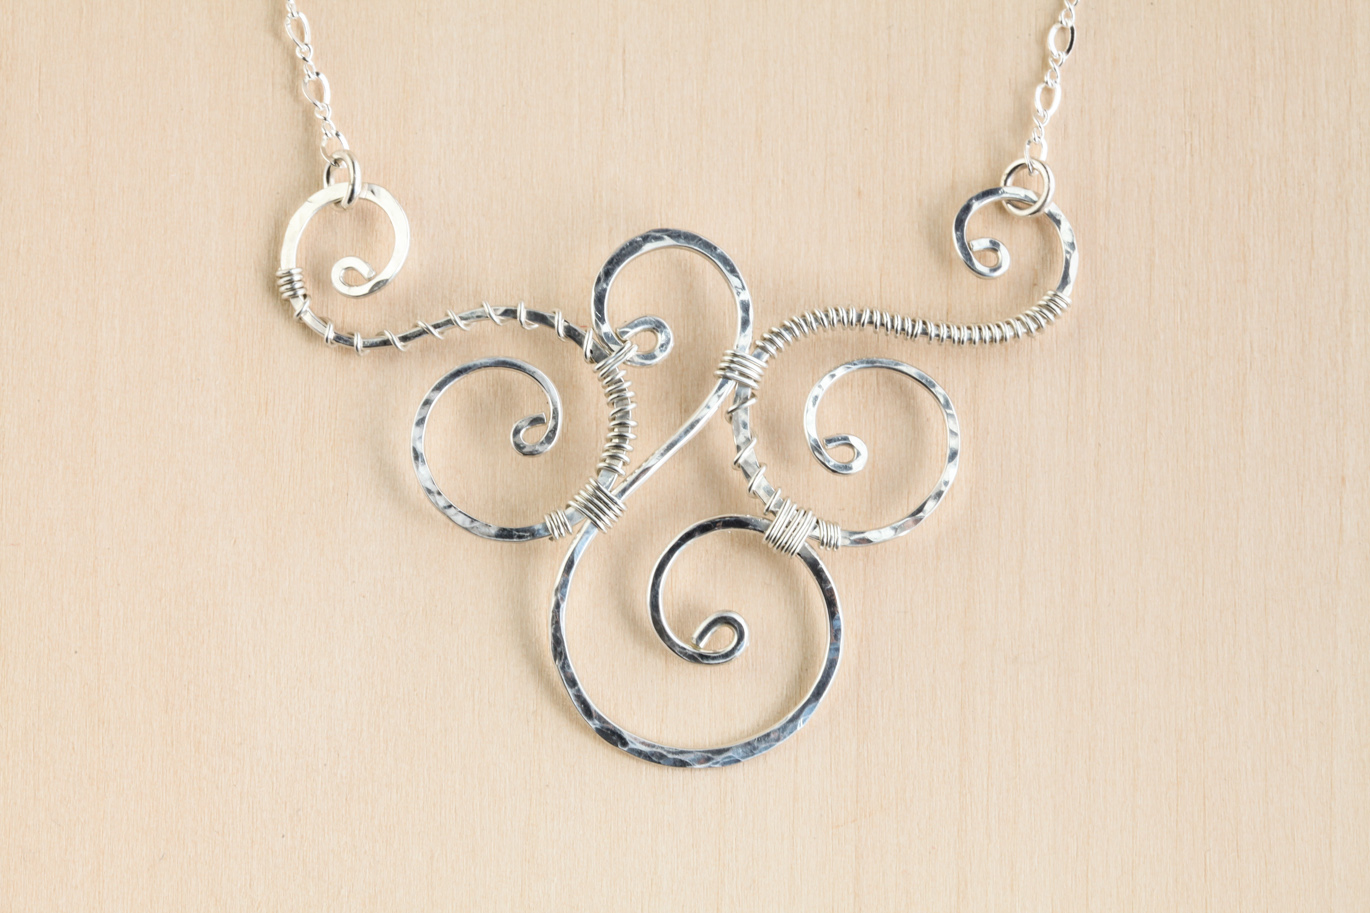 Spiral Link Necklace Silver Aluminum Wire Wire Jewelry